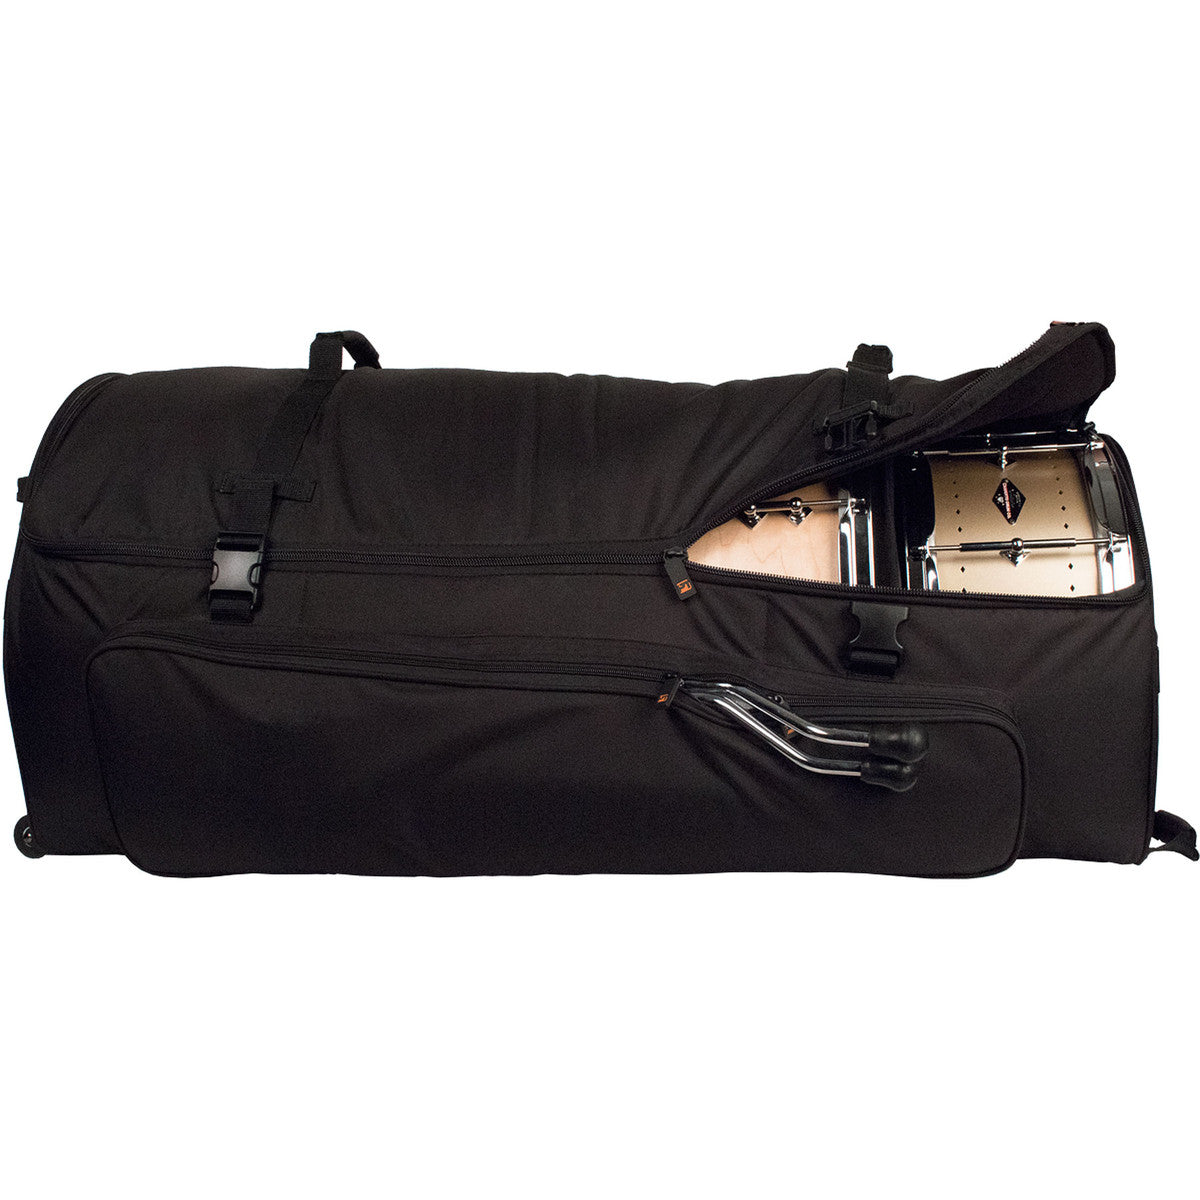 Protec Deluxe Series, Multi-Tom Bag with Wheels (CP200WL) Cymbal & Drum Cases Protec 